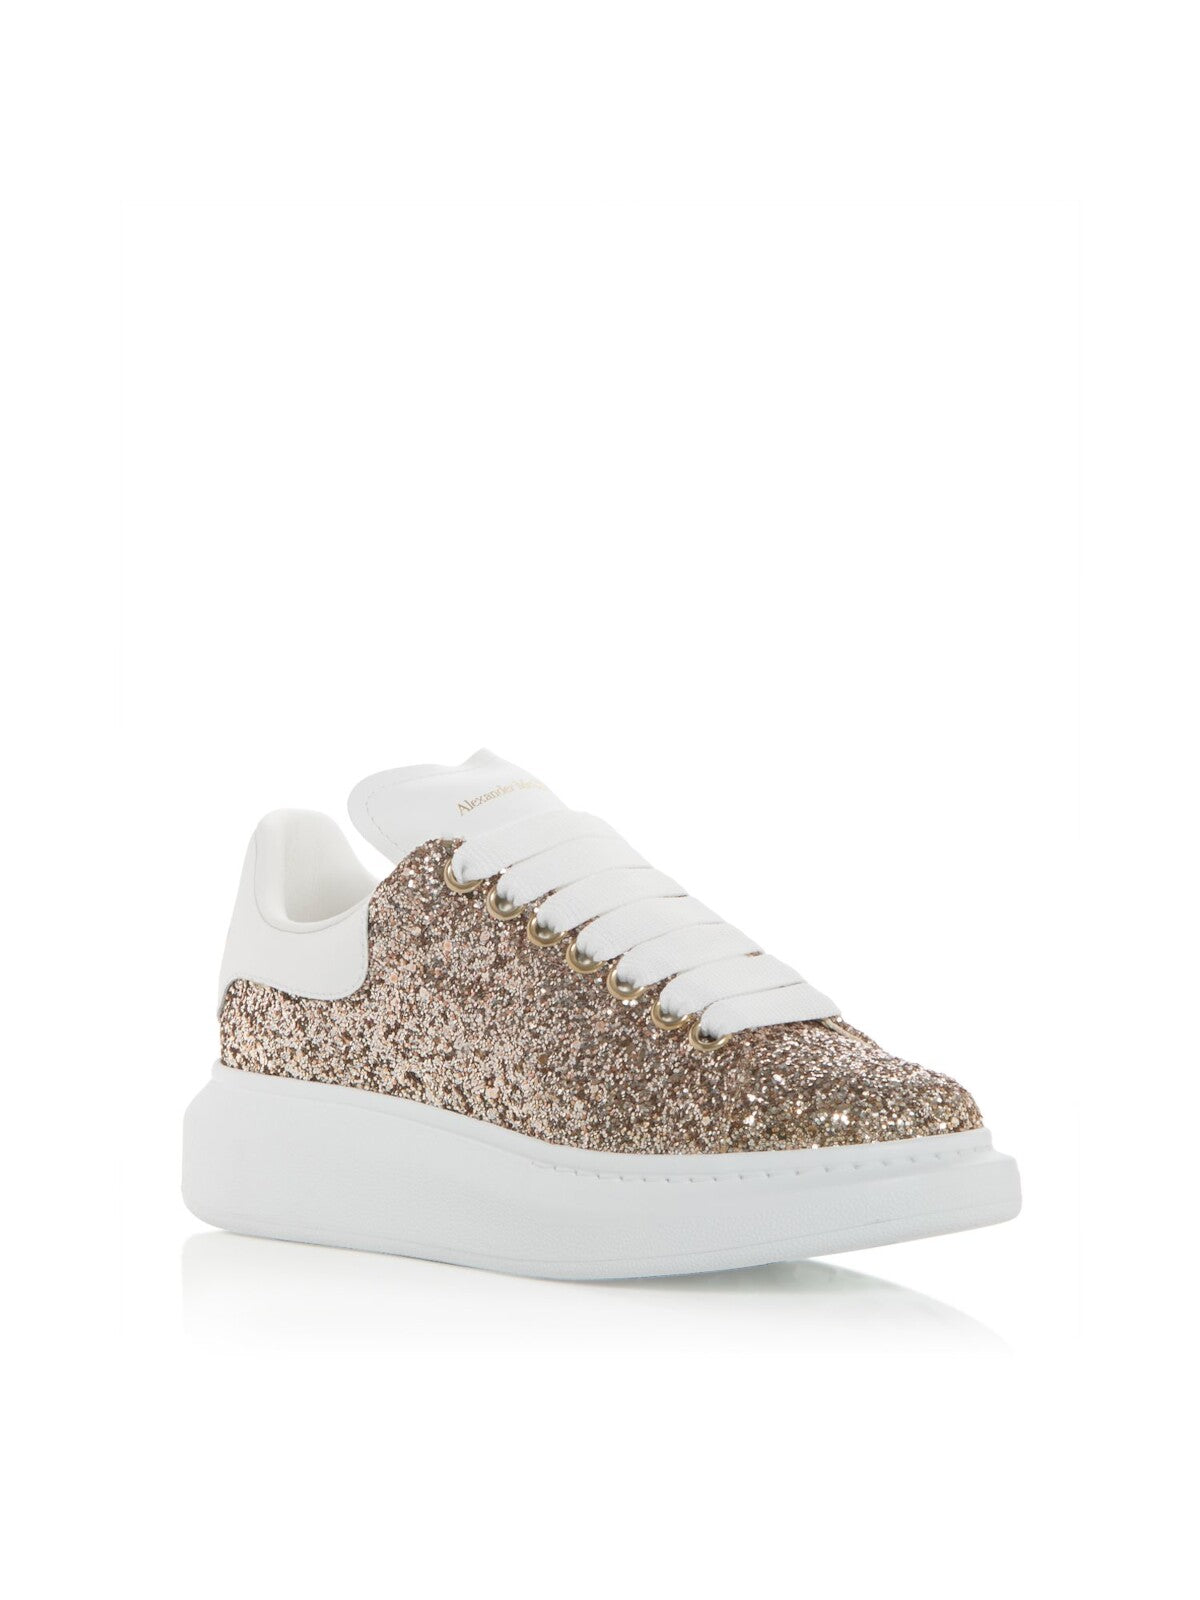 ALEXANDER MCQUEEN Womens Brown Glitter-Embellished 1-1/2" Platform Padded Round Toe Wedge Lace-Up Sneakers Shoes 41